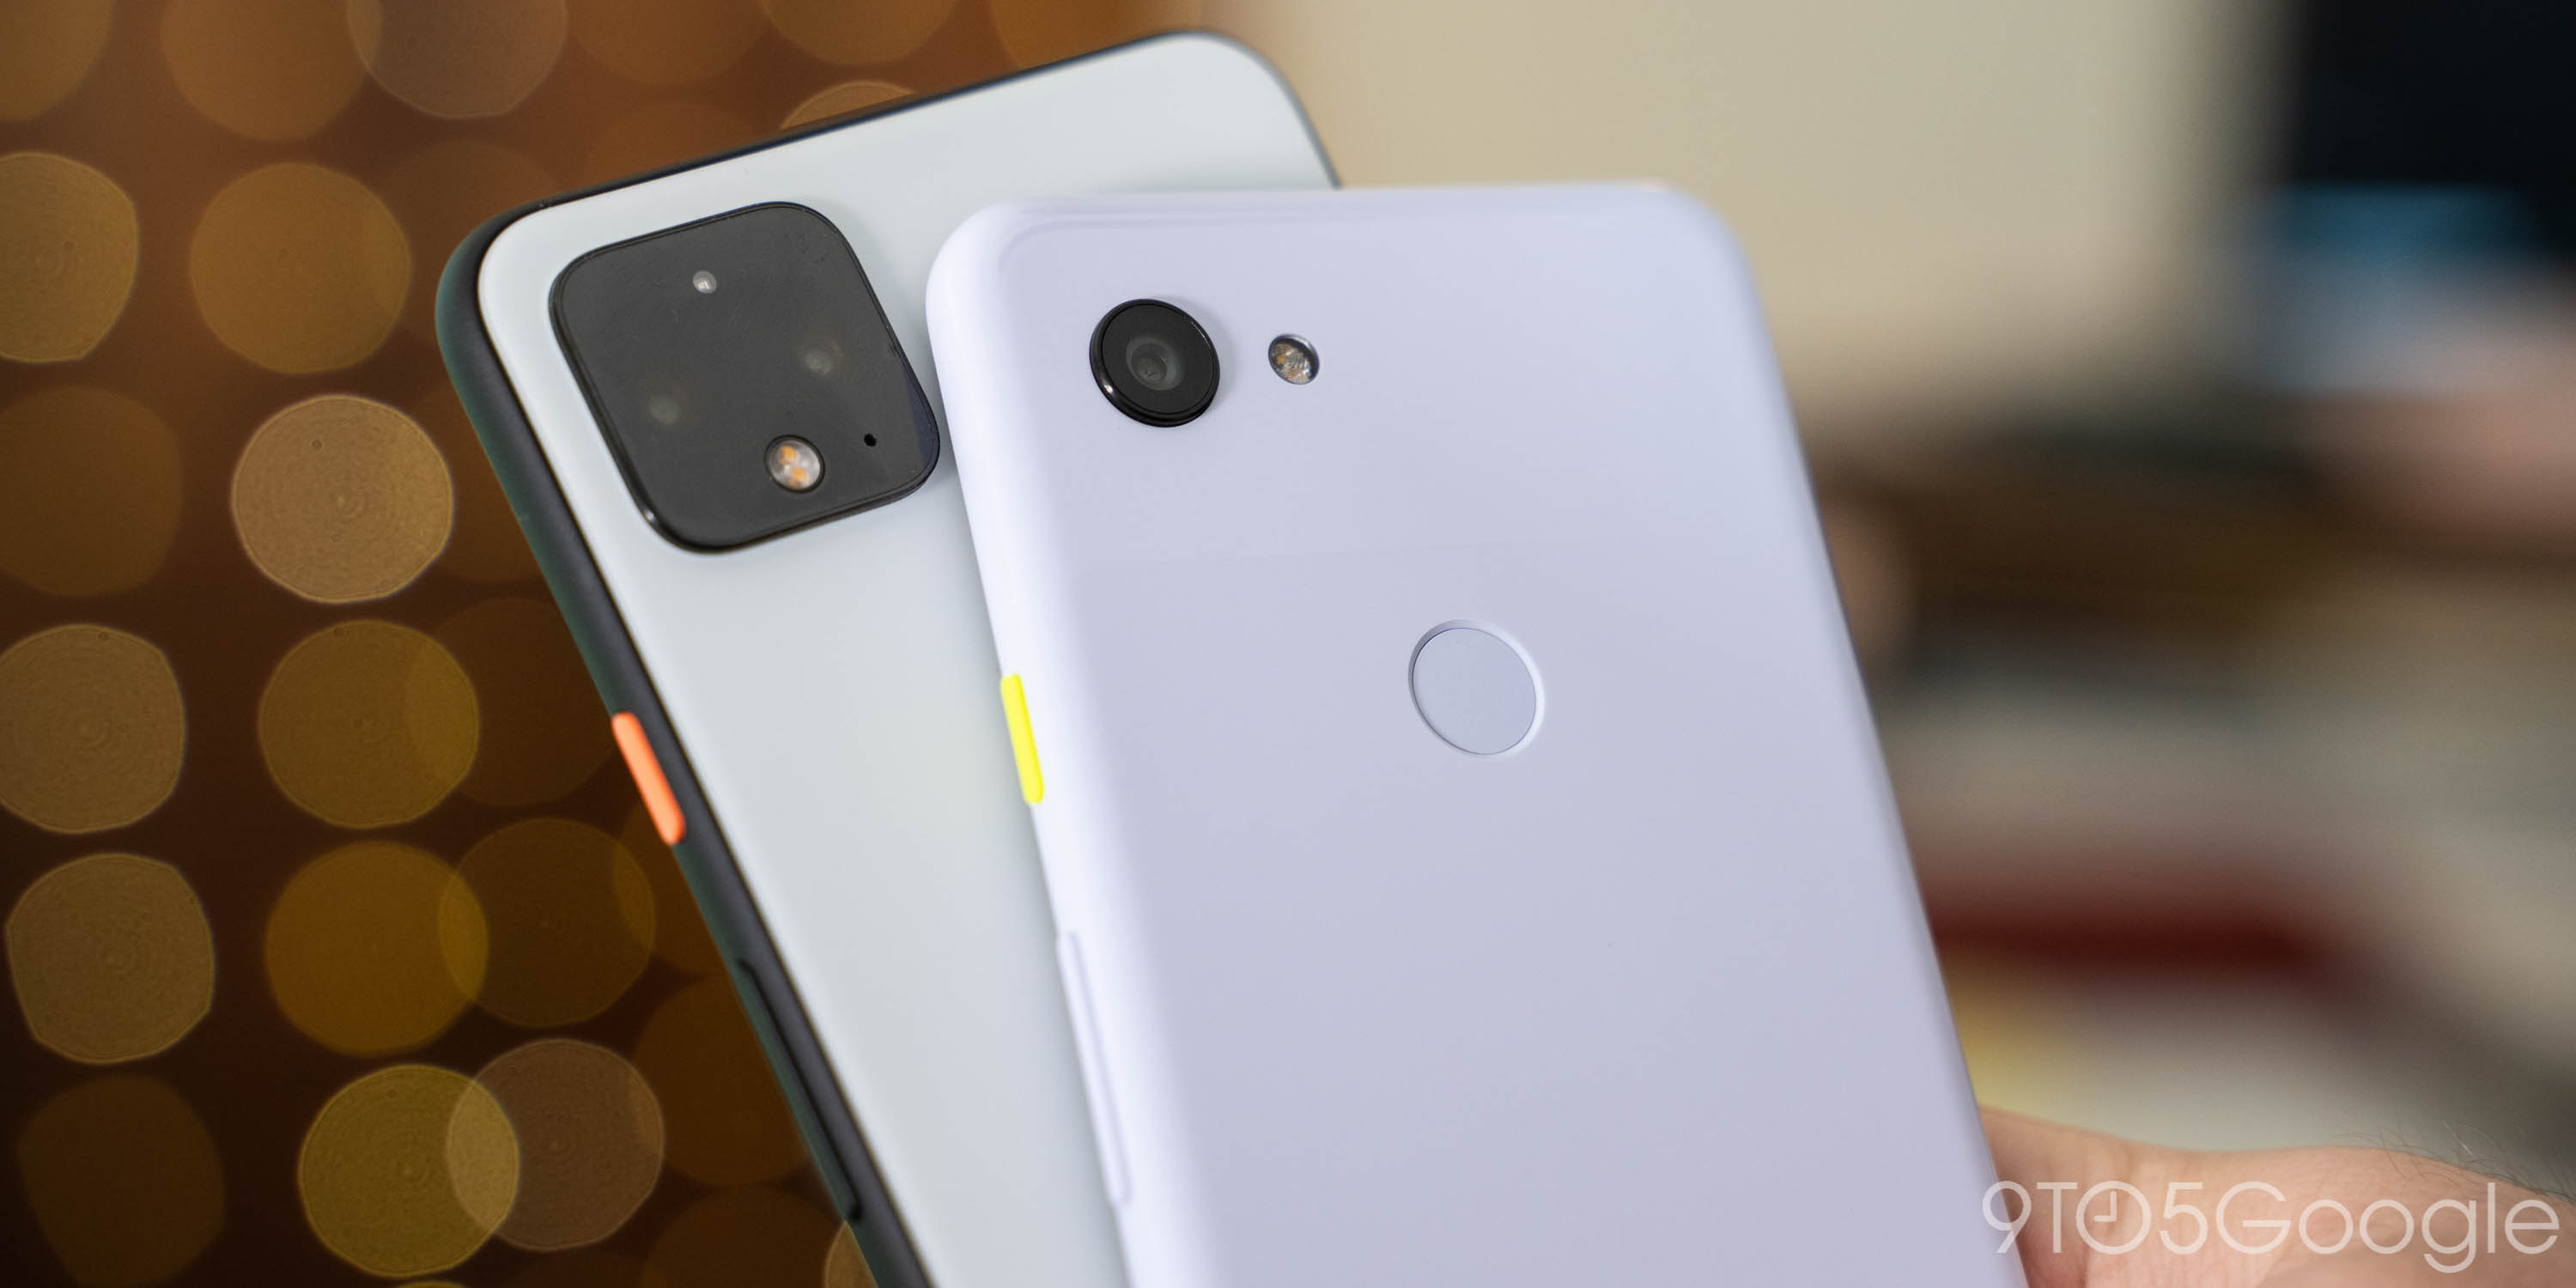 Replacement Rear Back Main Camera Fits For Google Pixel 3a Google Pixel 3a XL